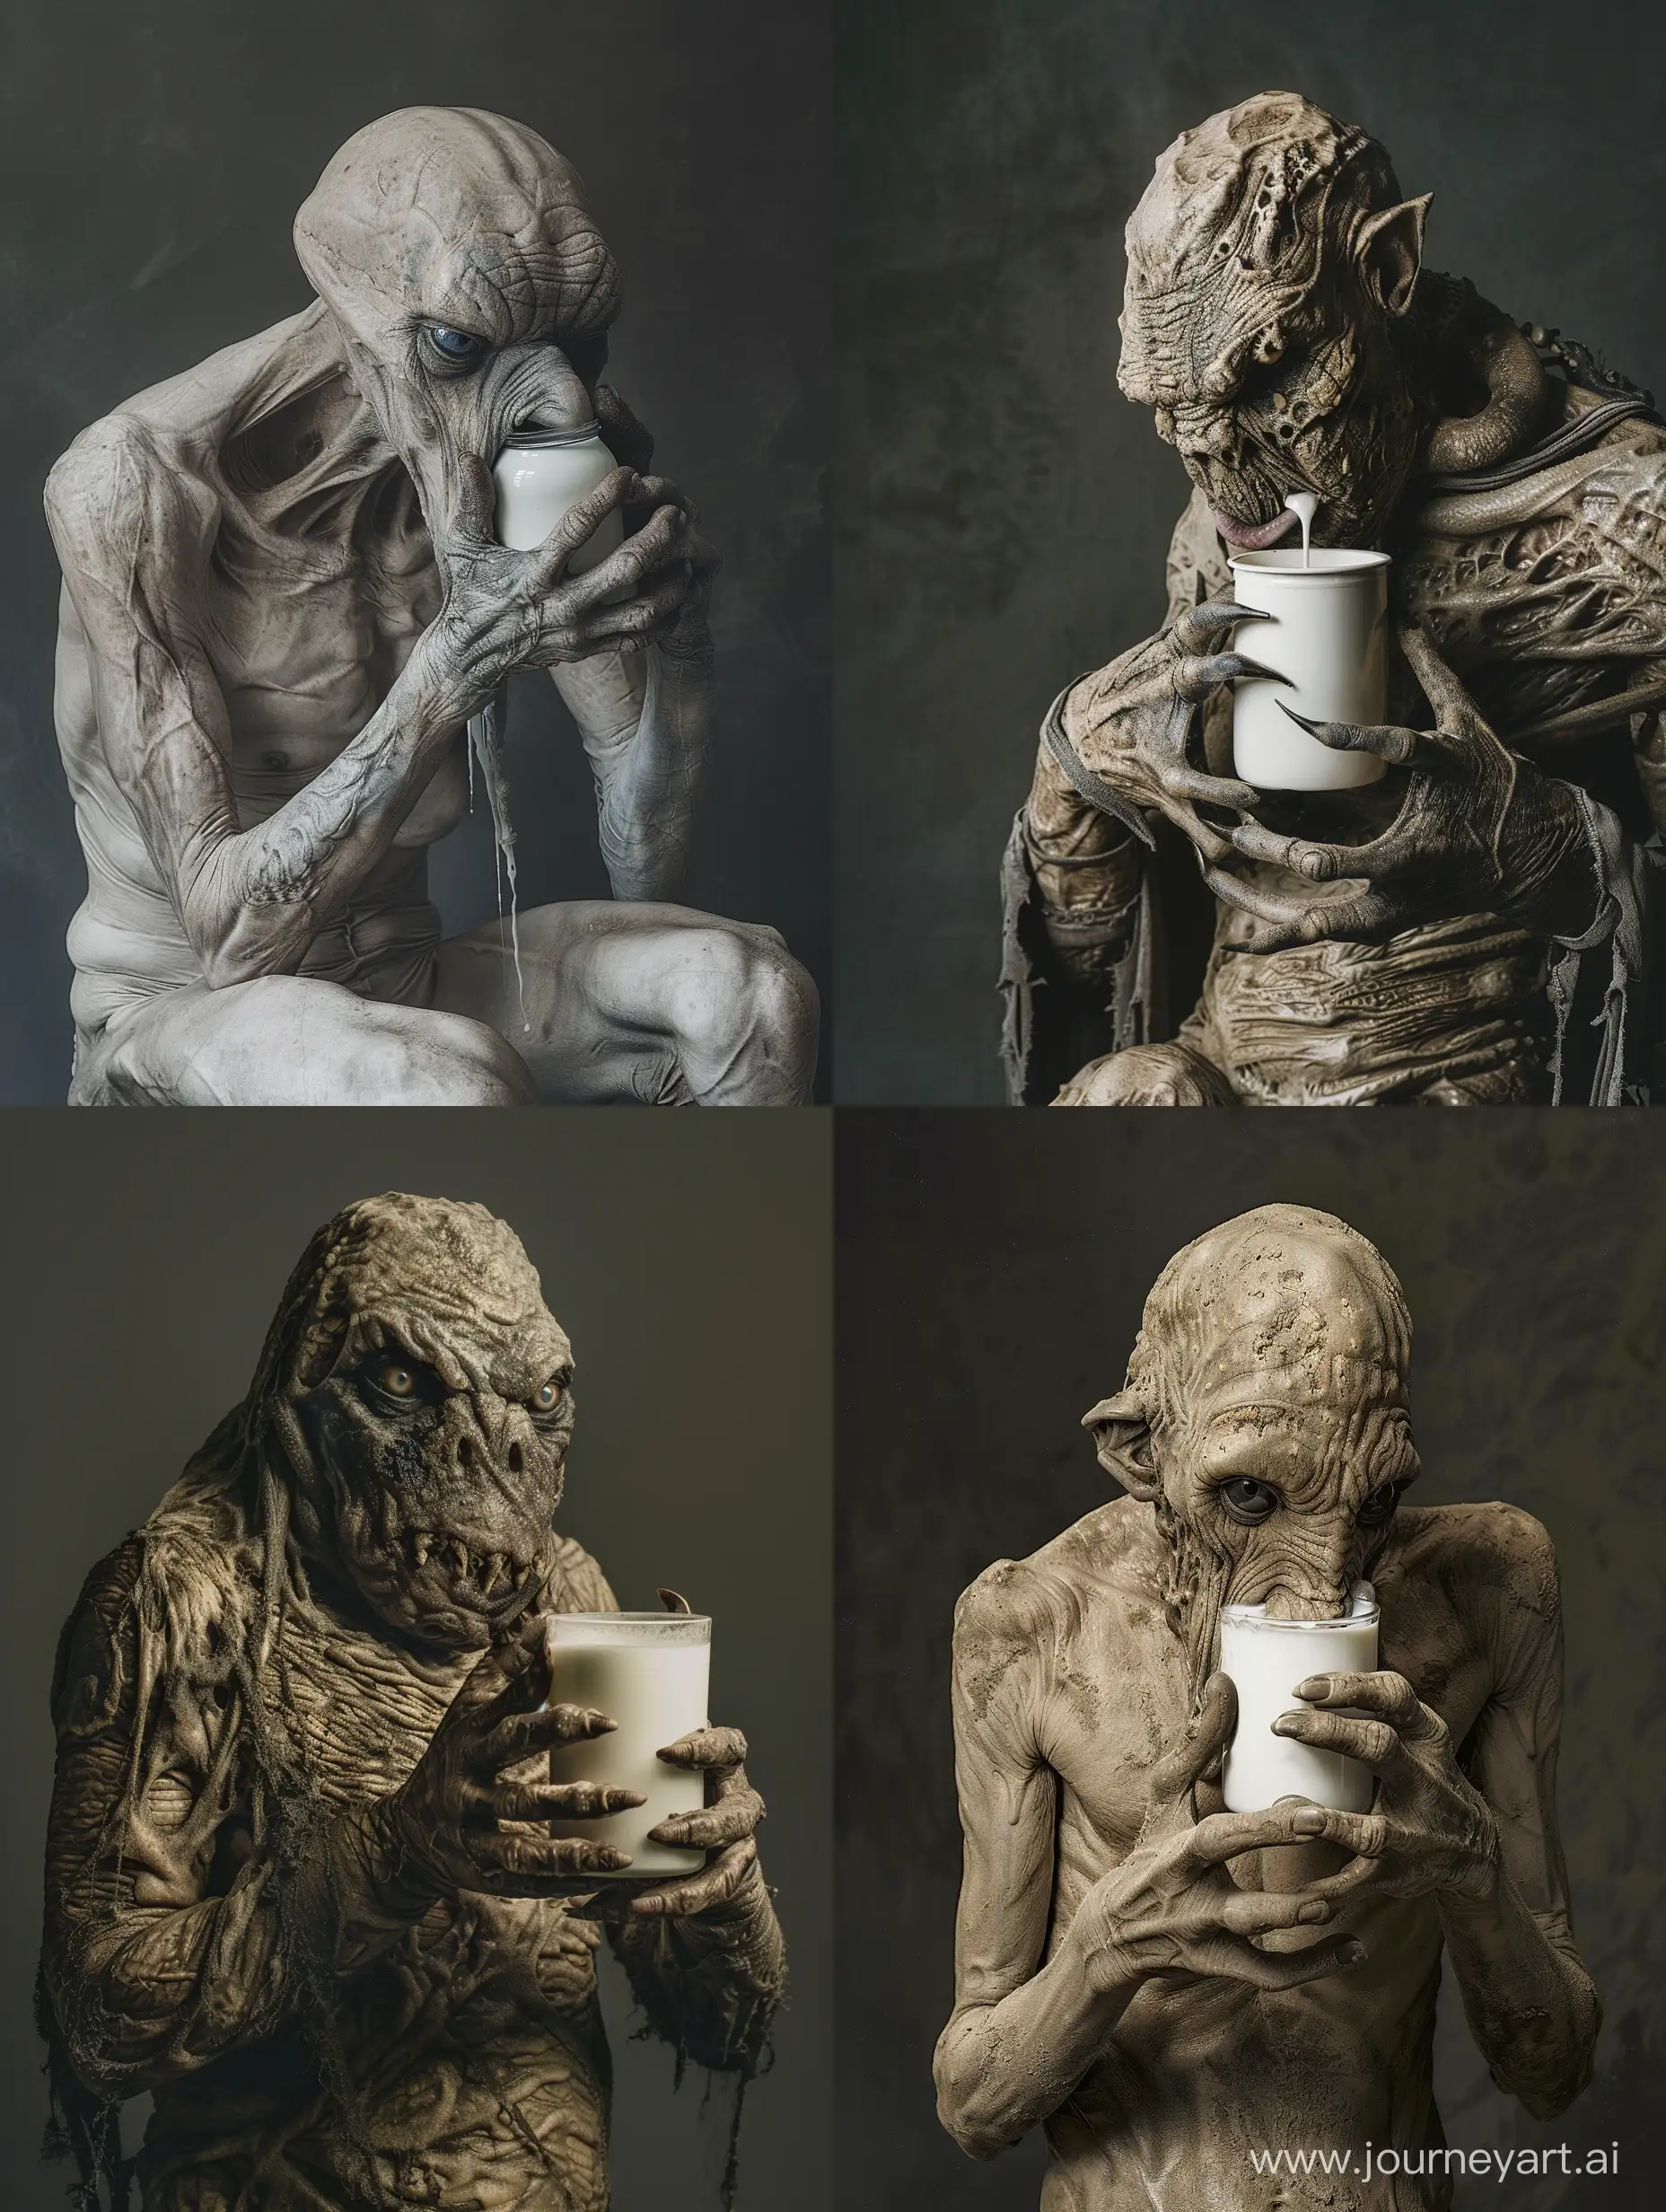 Terrifying-Creature-Holding-Milk-Highly-Detailed-Full-Body-Photography